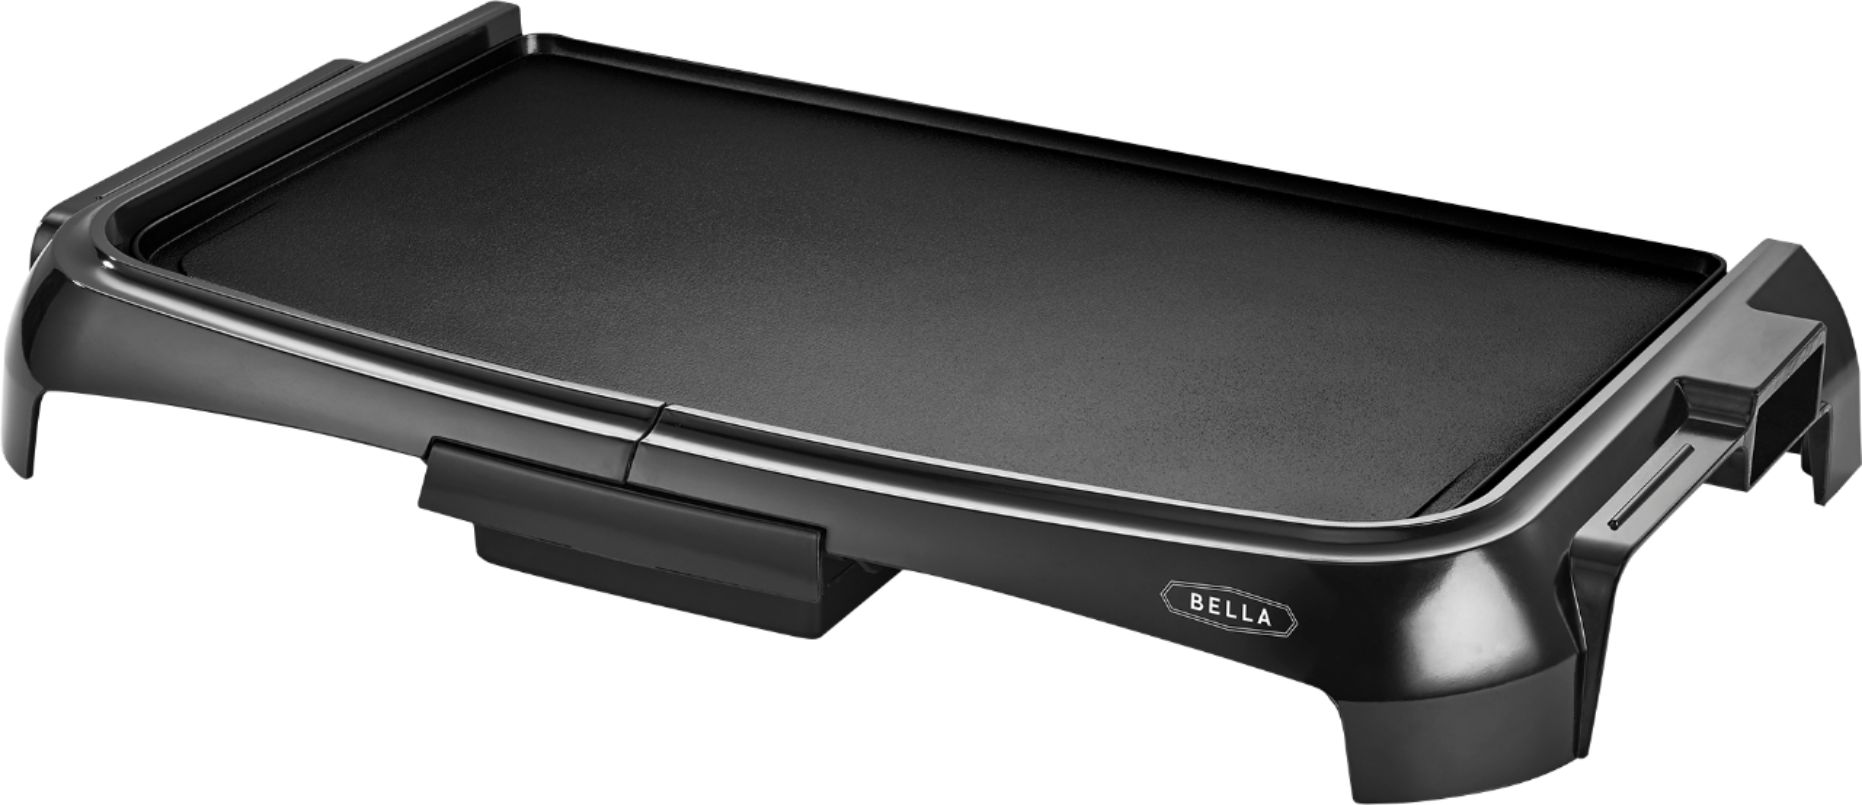 Left View: Bella Pro Series - Countertop Indoor Non-Stick Electric Grill - Stainless Steel